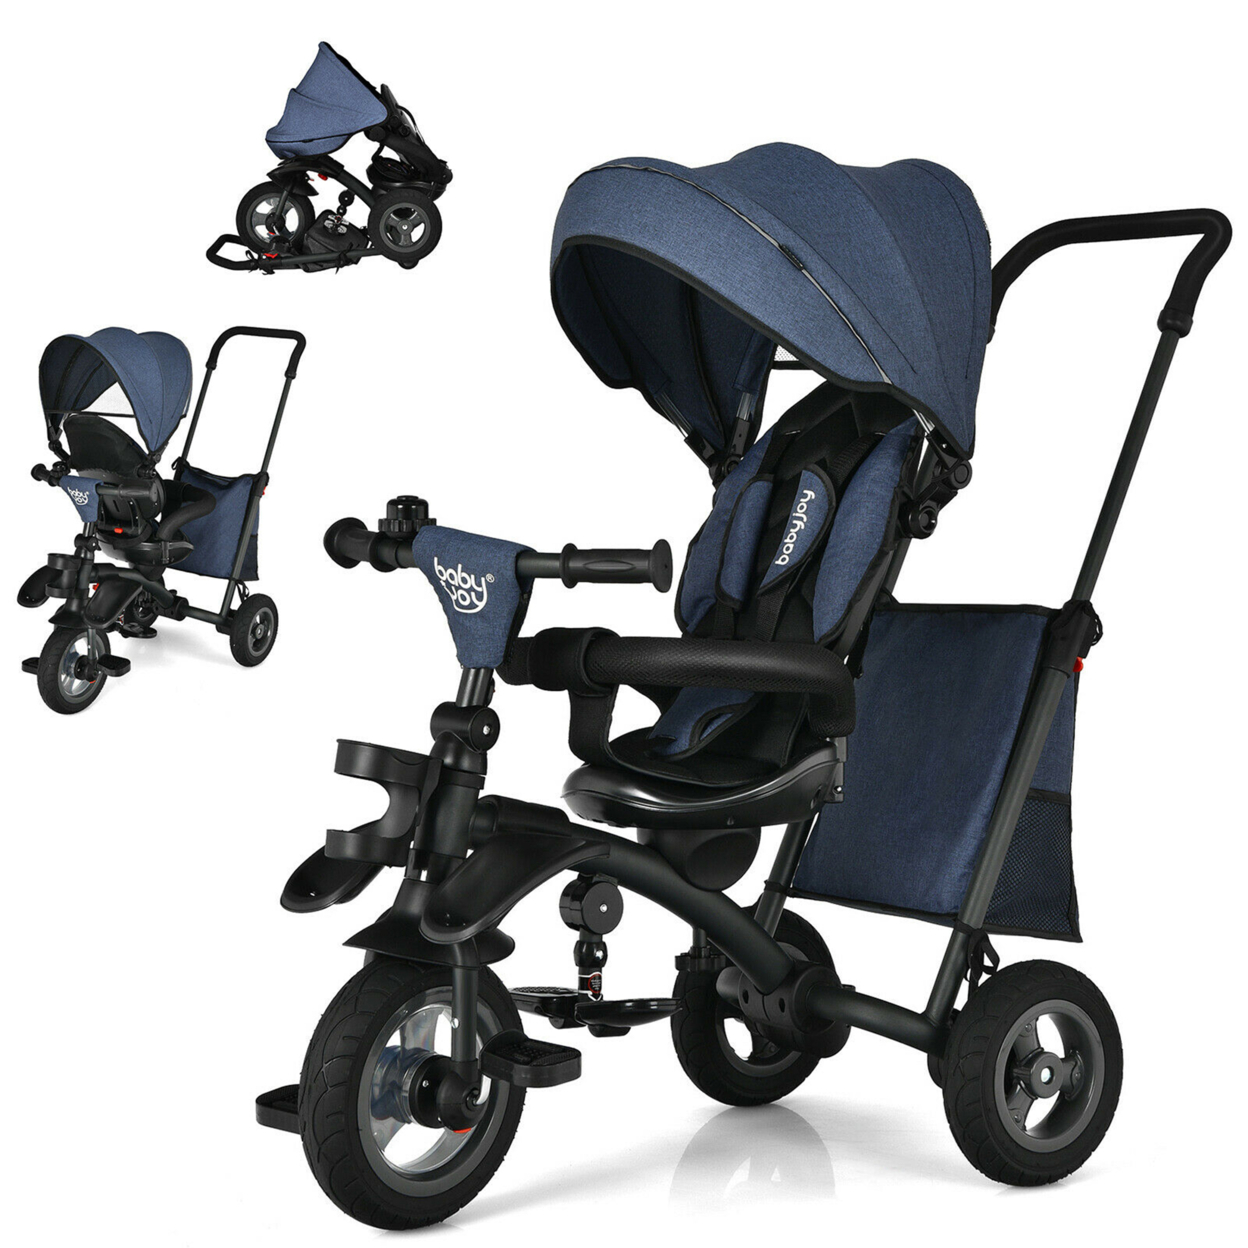 7-In-1 Kids Baby Tricycle Folding Steer Stroller W/ Rotatable Seat - Blue